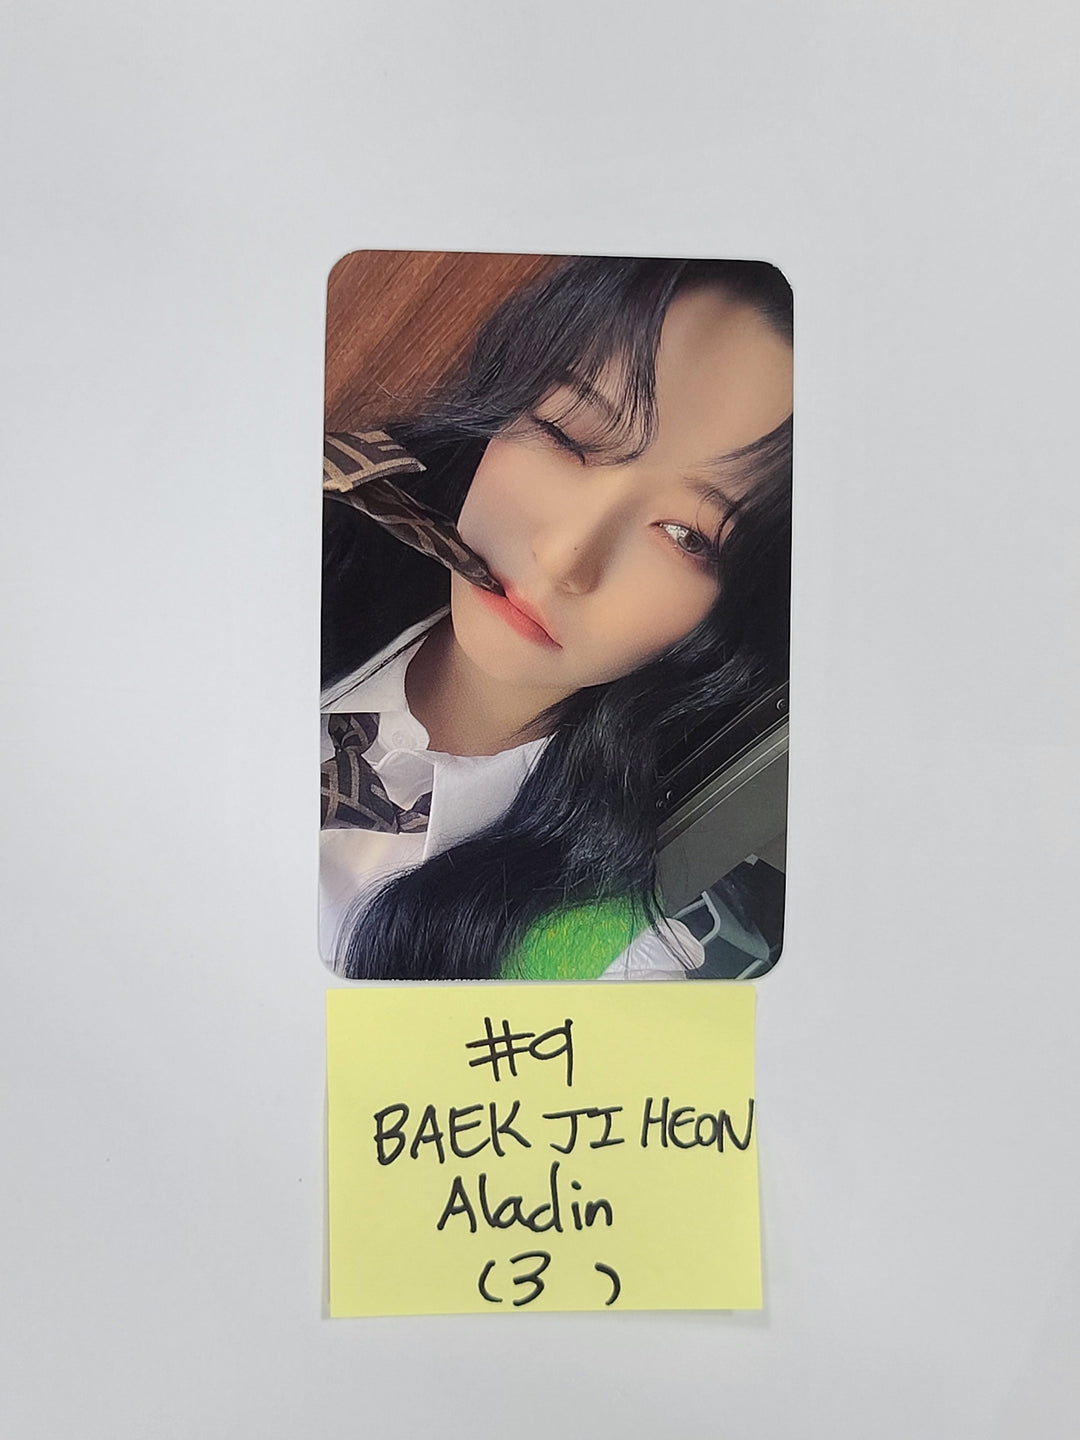 Fromis_9 "from our Memento Box" - Aladin Pre-Order Benefit Photocard